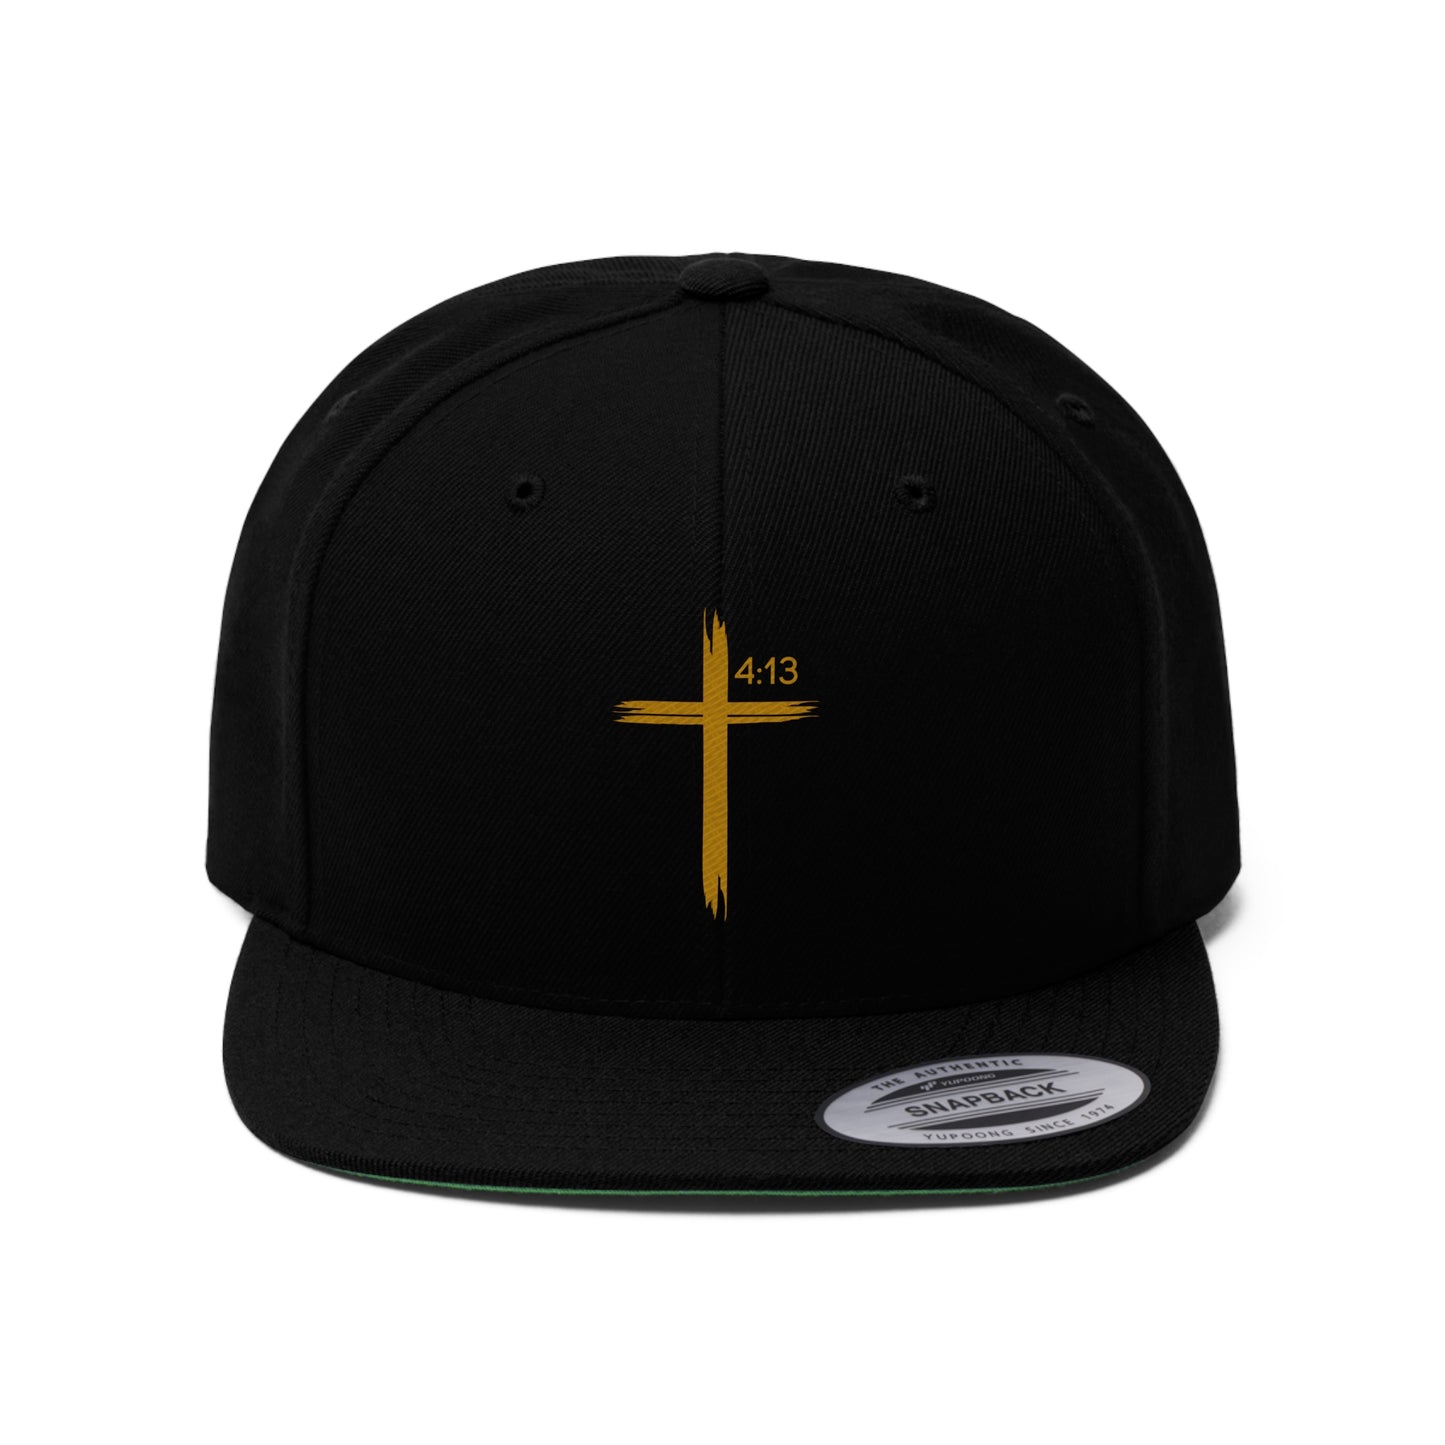 Gives Me Strength 4:13 Flat Bill Hat